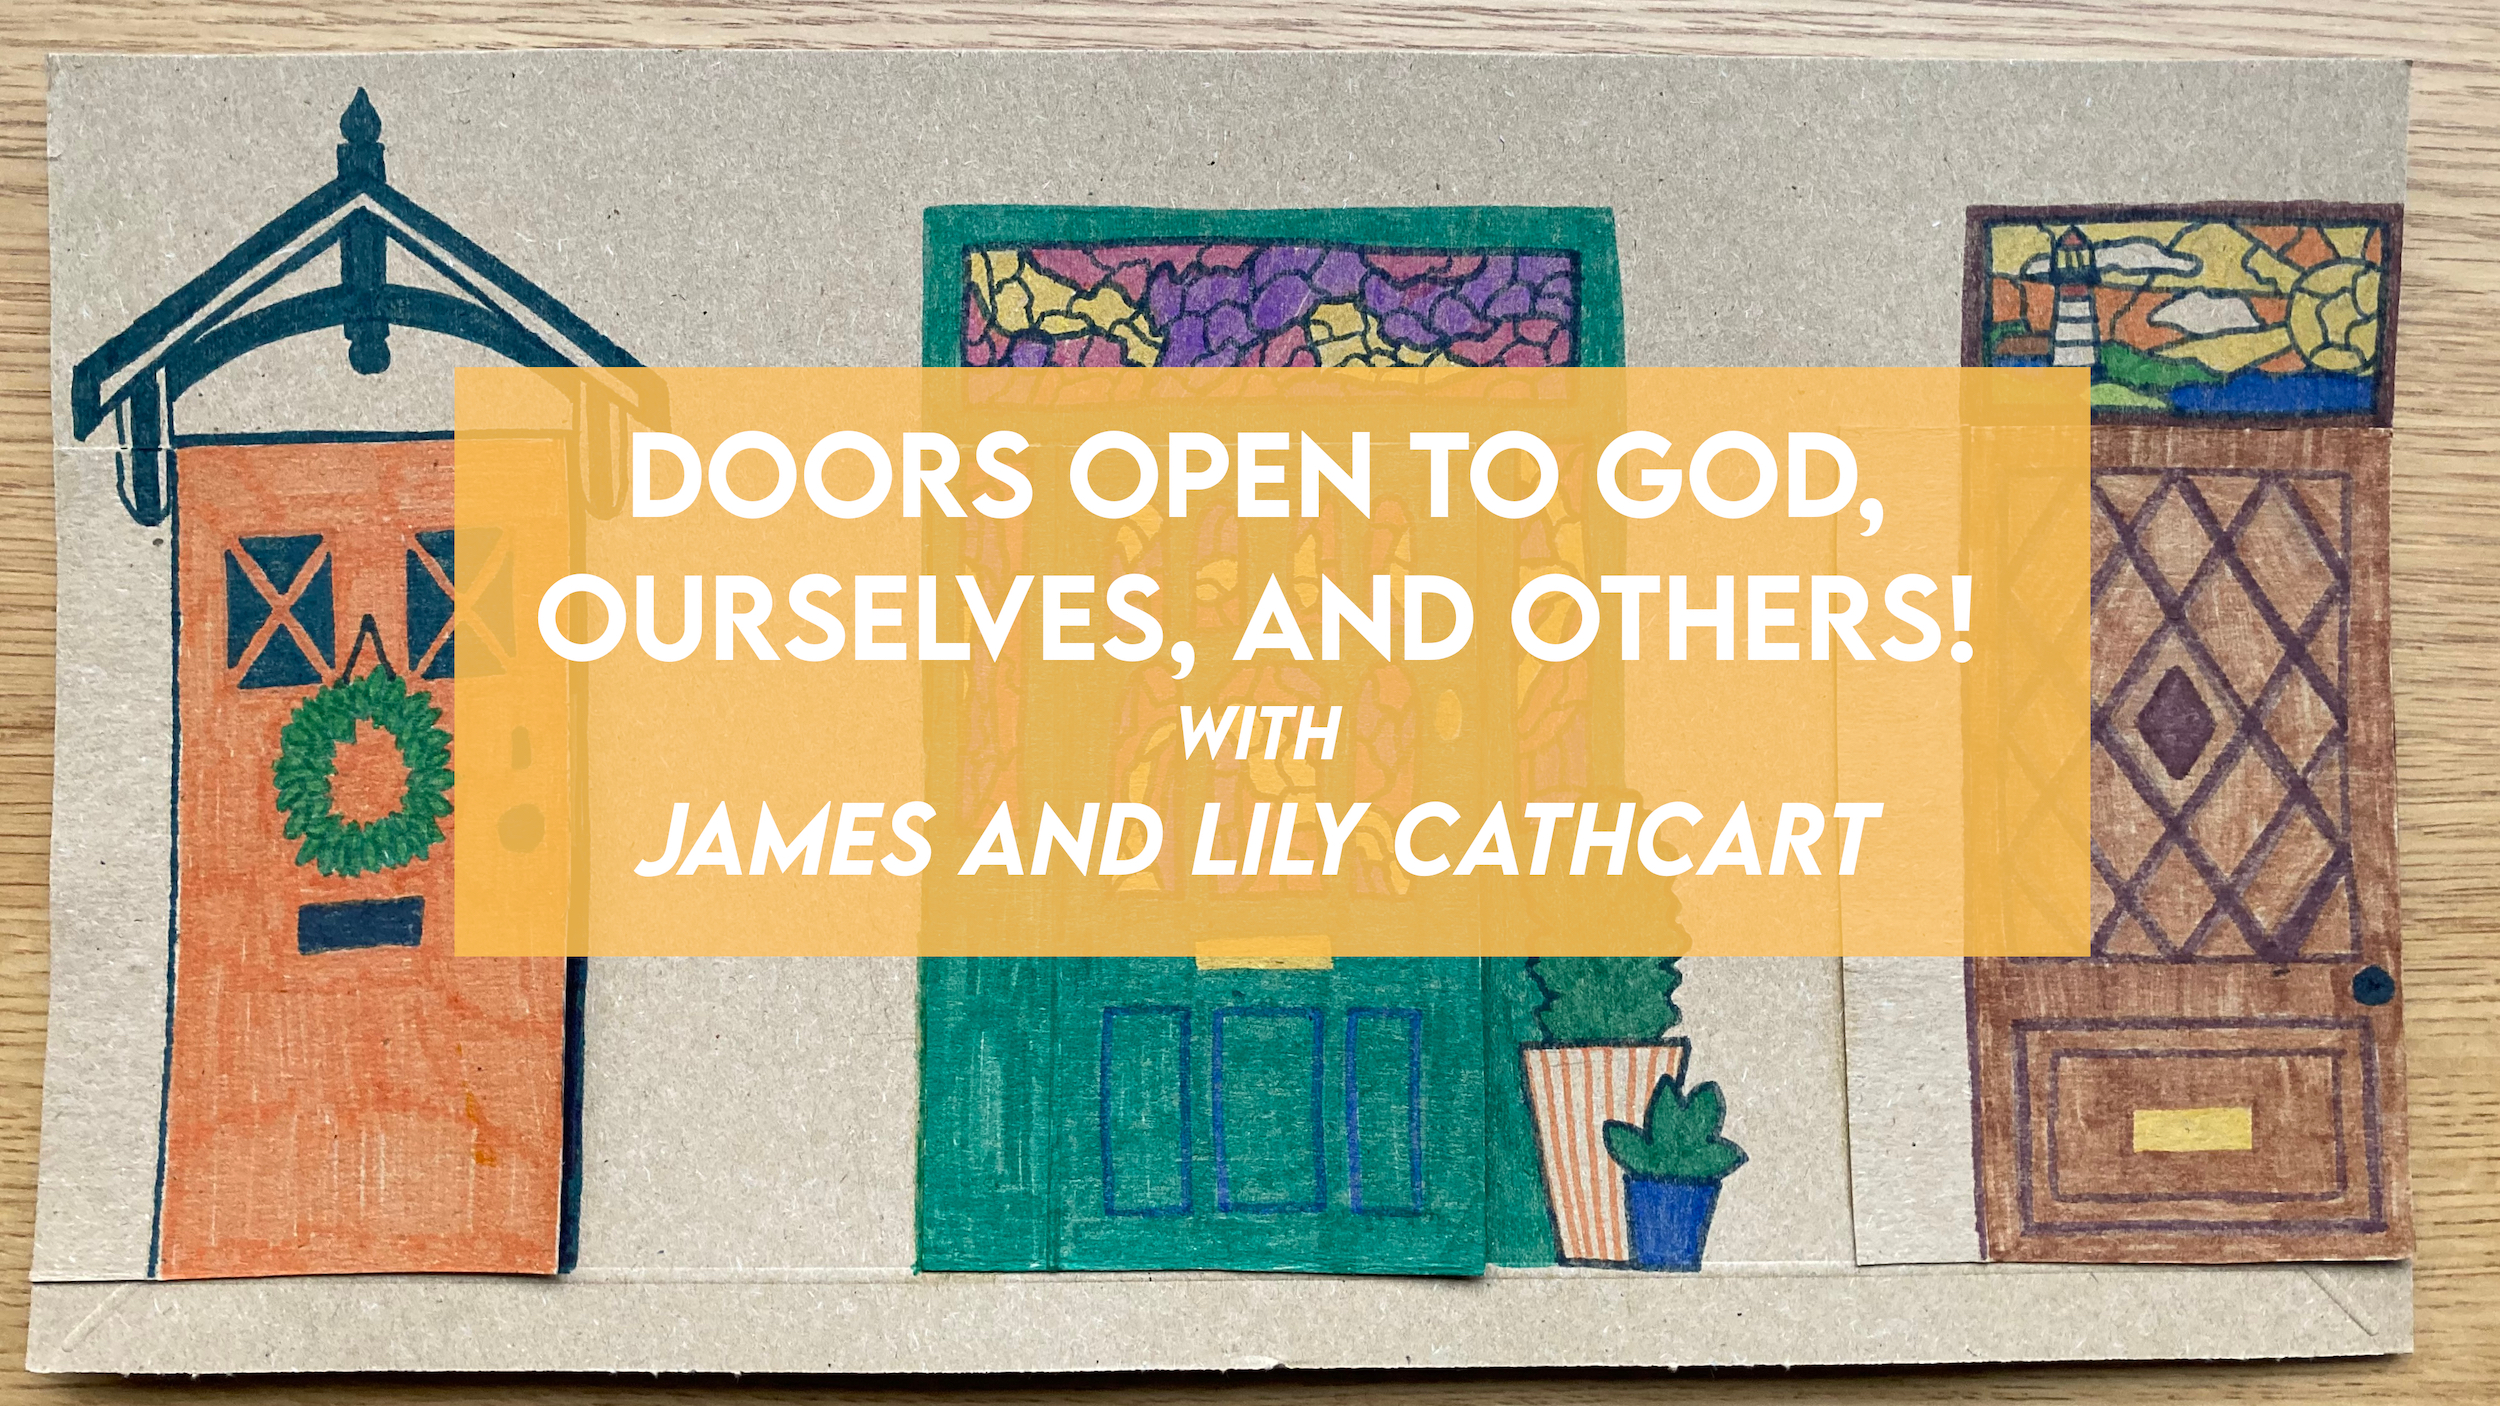 Doors open to God, ourselves and others!